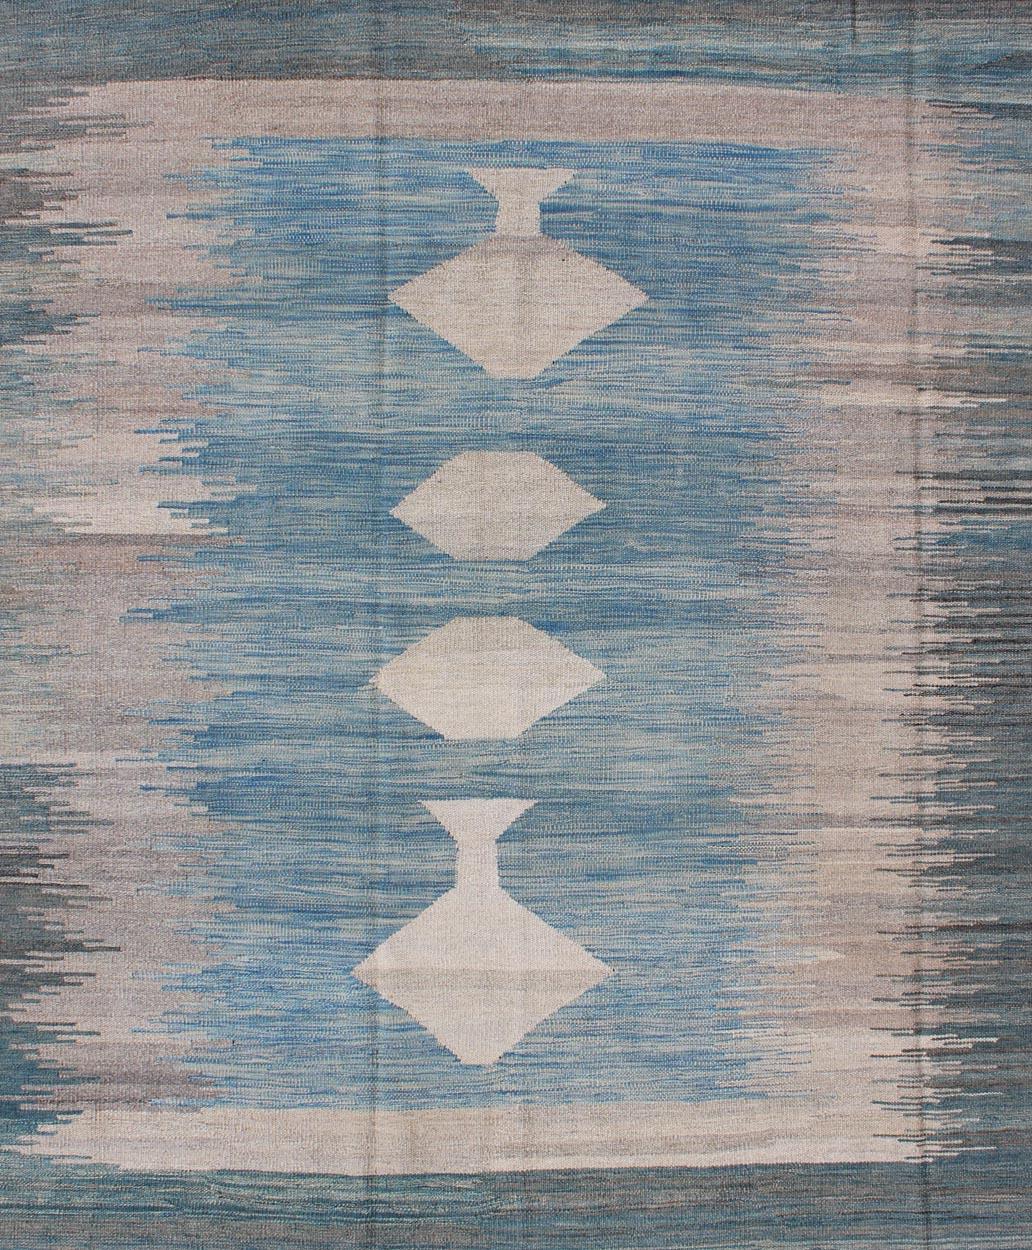 Hand-Woven Modern Tribal Kilim in Shades of Blue's and Gray's For Sale